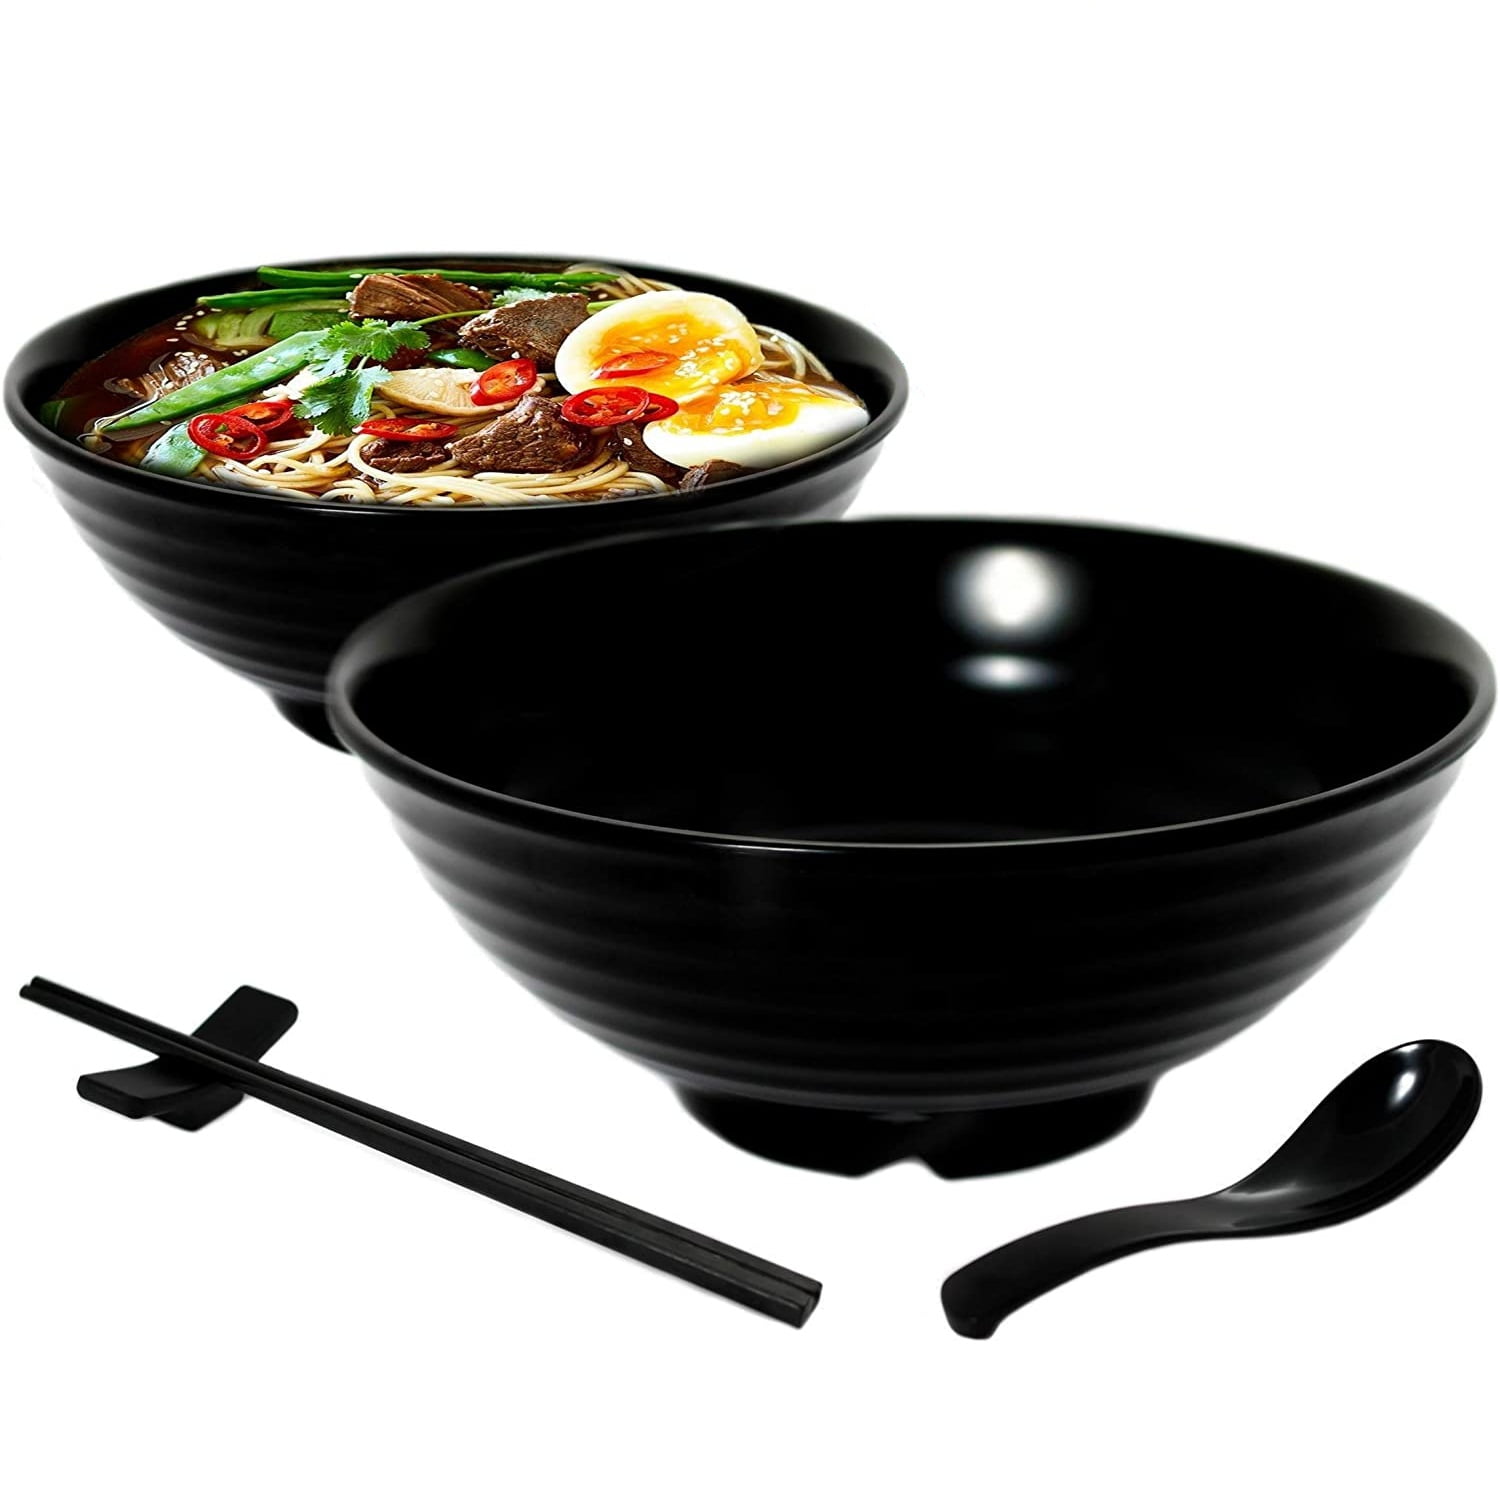 ISKYBOB Red Black Bowl and Spoon Sets 4 x Soup Bowl 4 x Long Handle Spoons Melamine Tableware Chinese Style Noodle Bowls with Long Handle Hook Soup Spoons